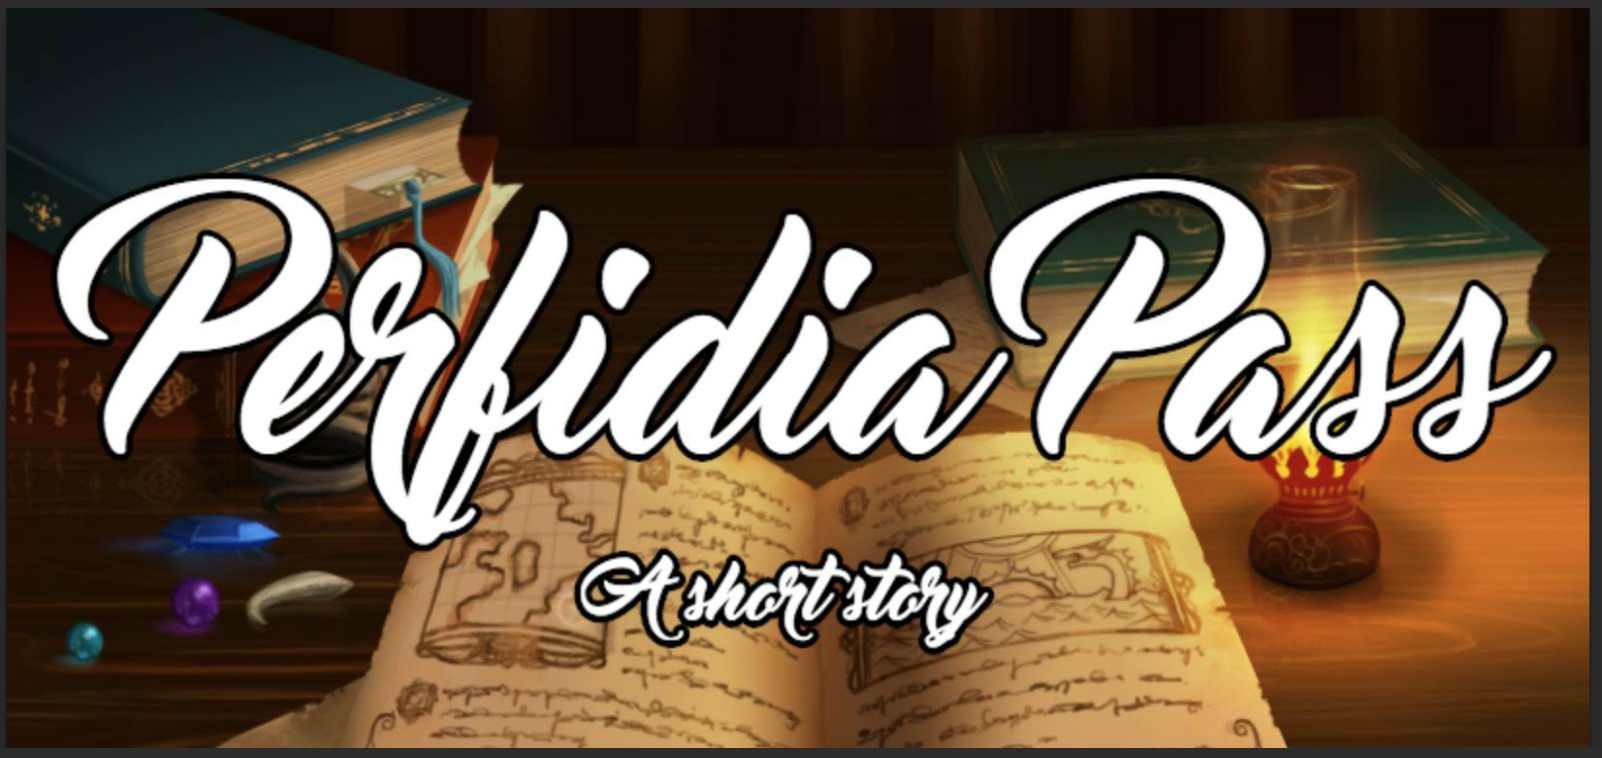 Perfidia Pass - a short story